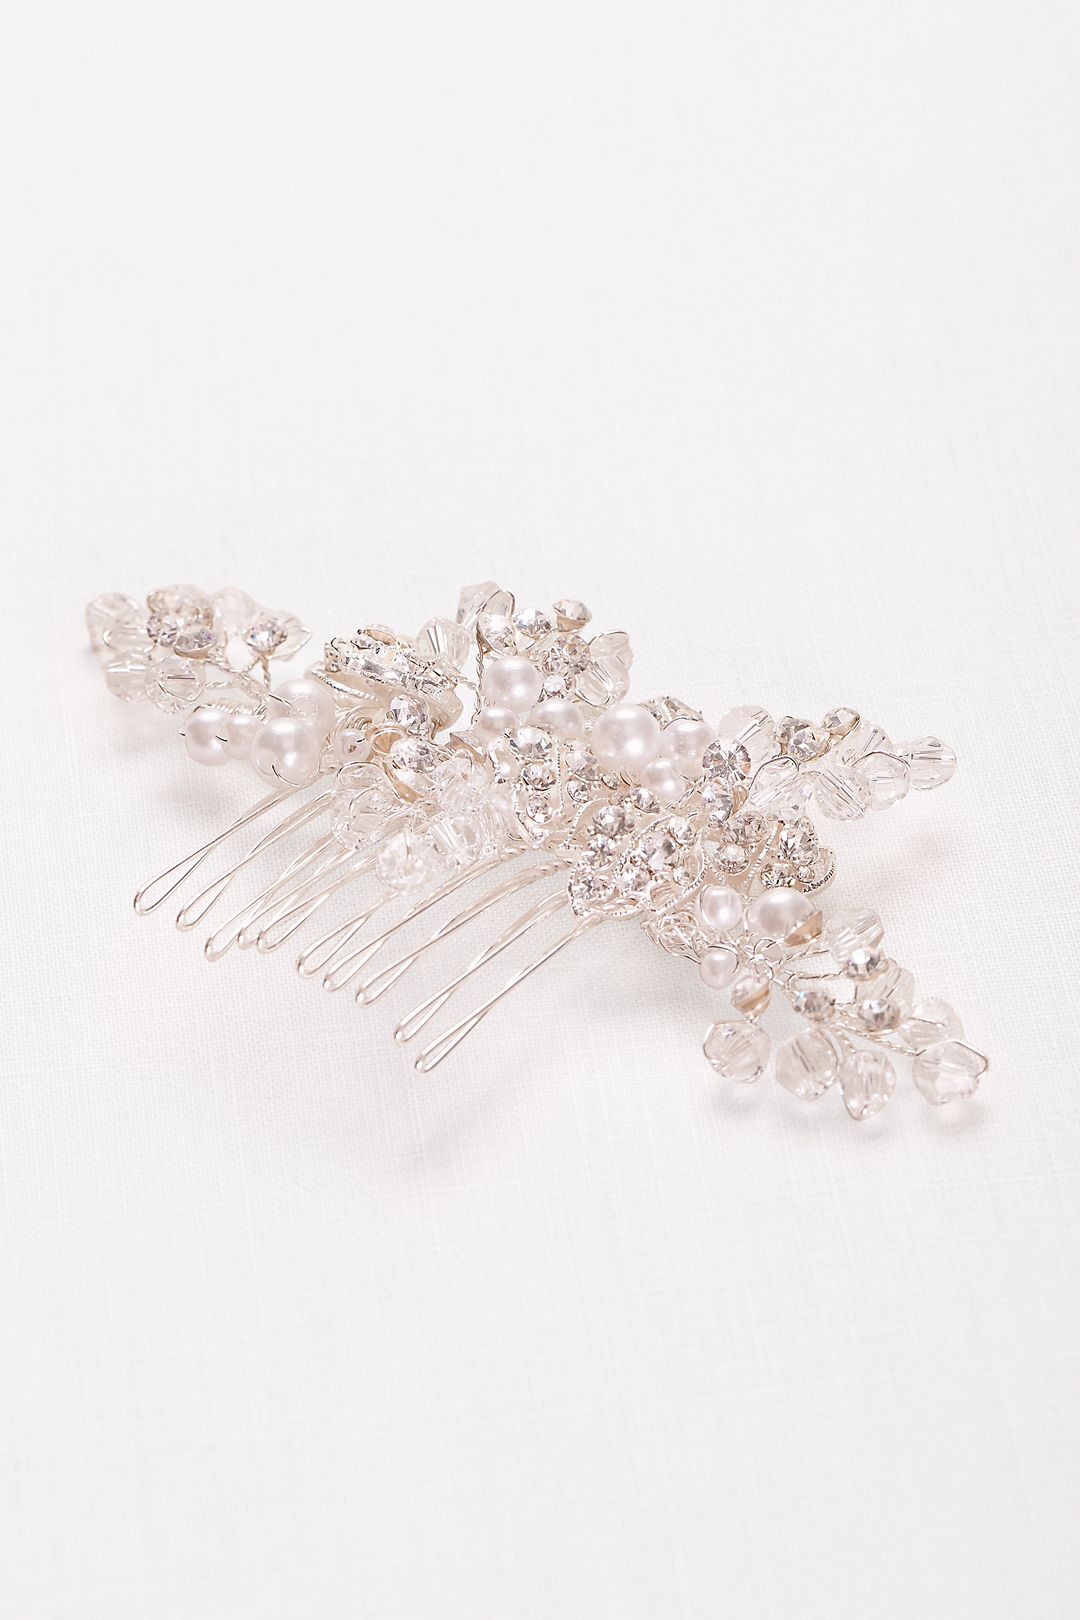 Silver Floral Comb with Pearls  Image 3